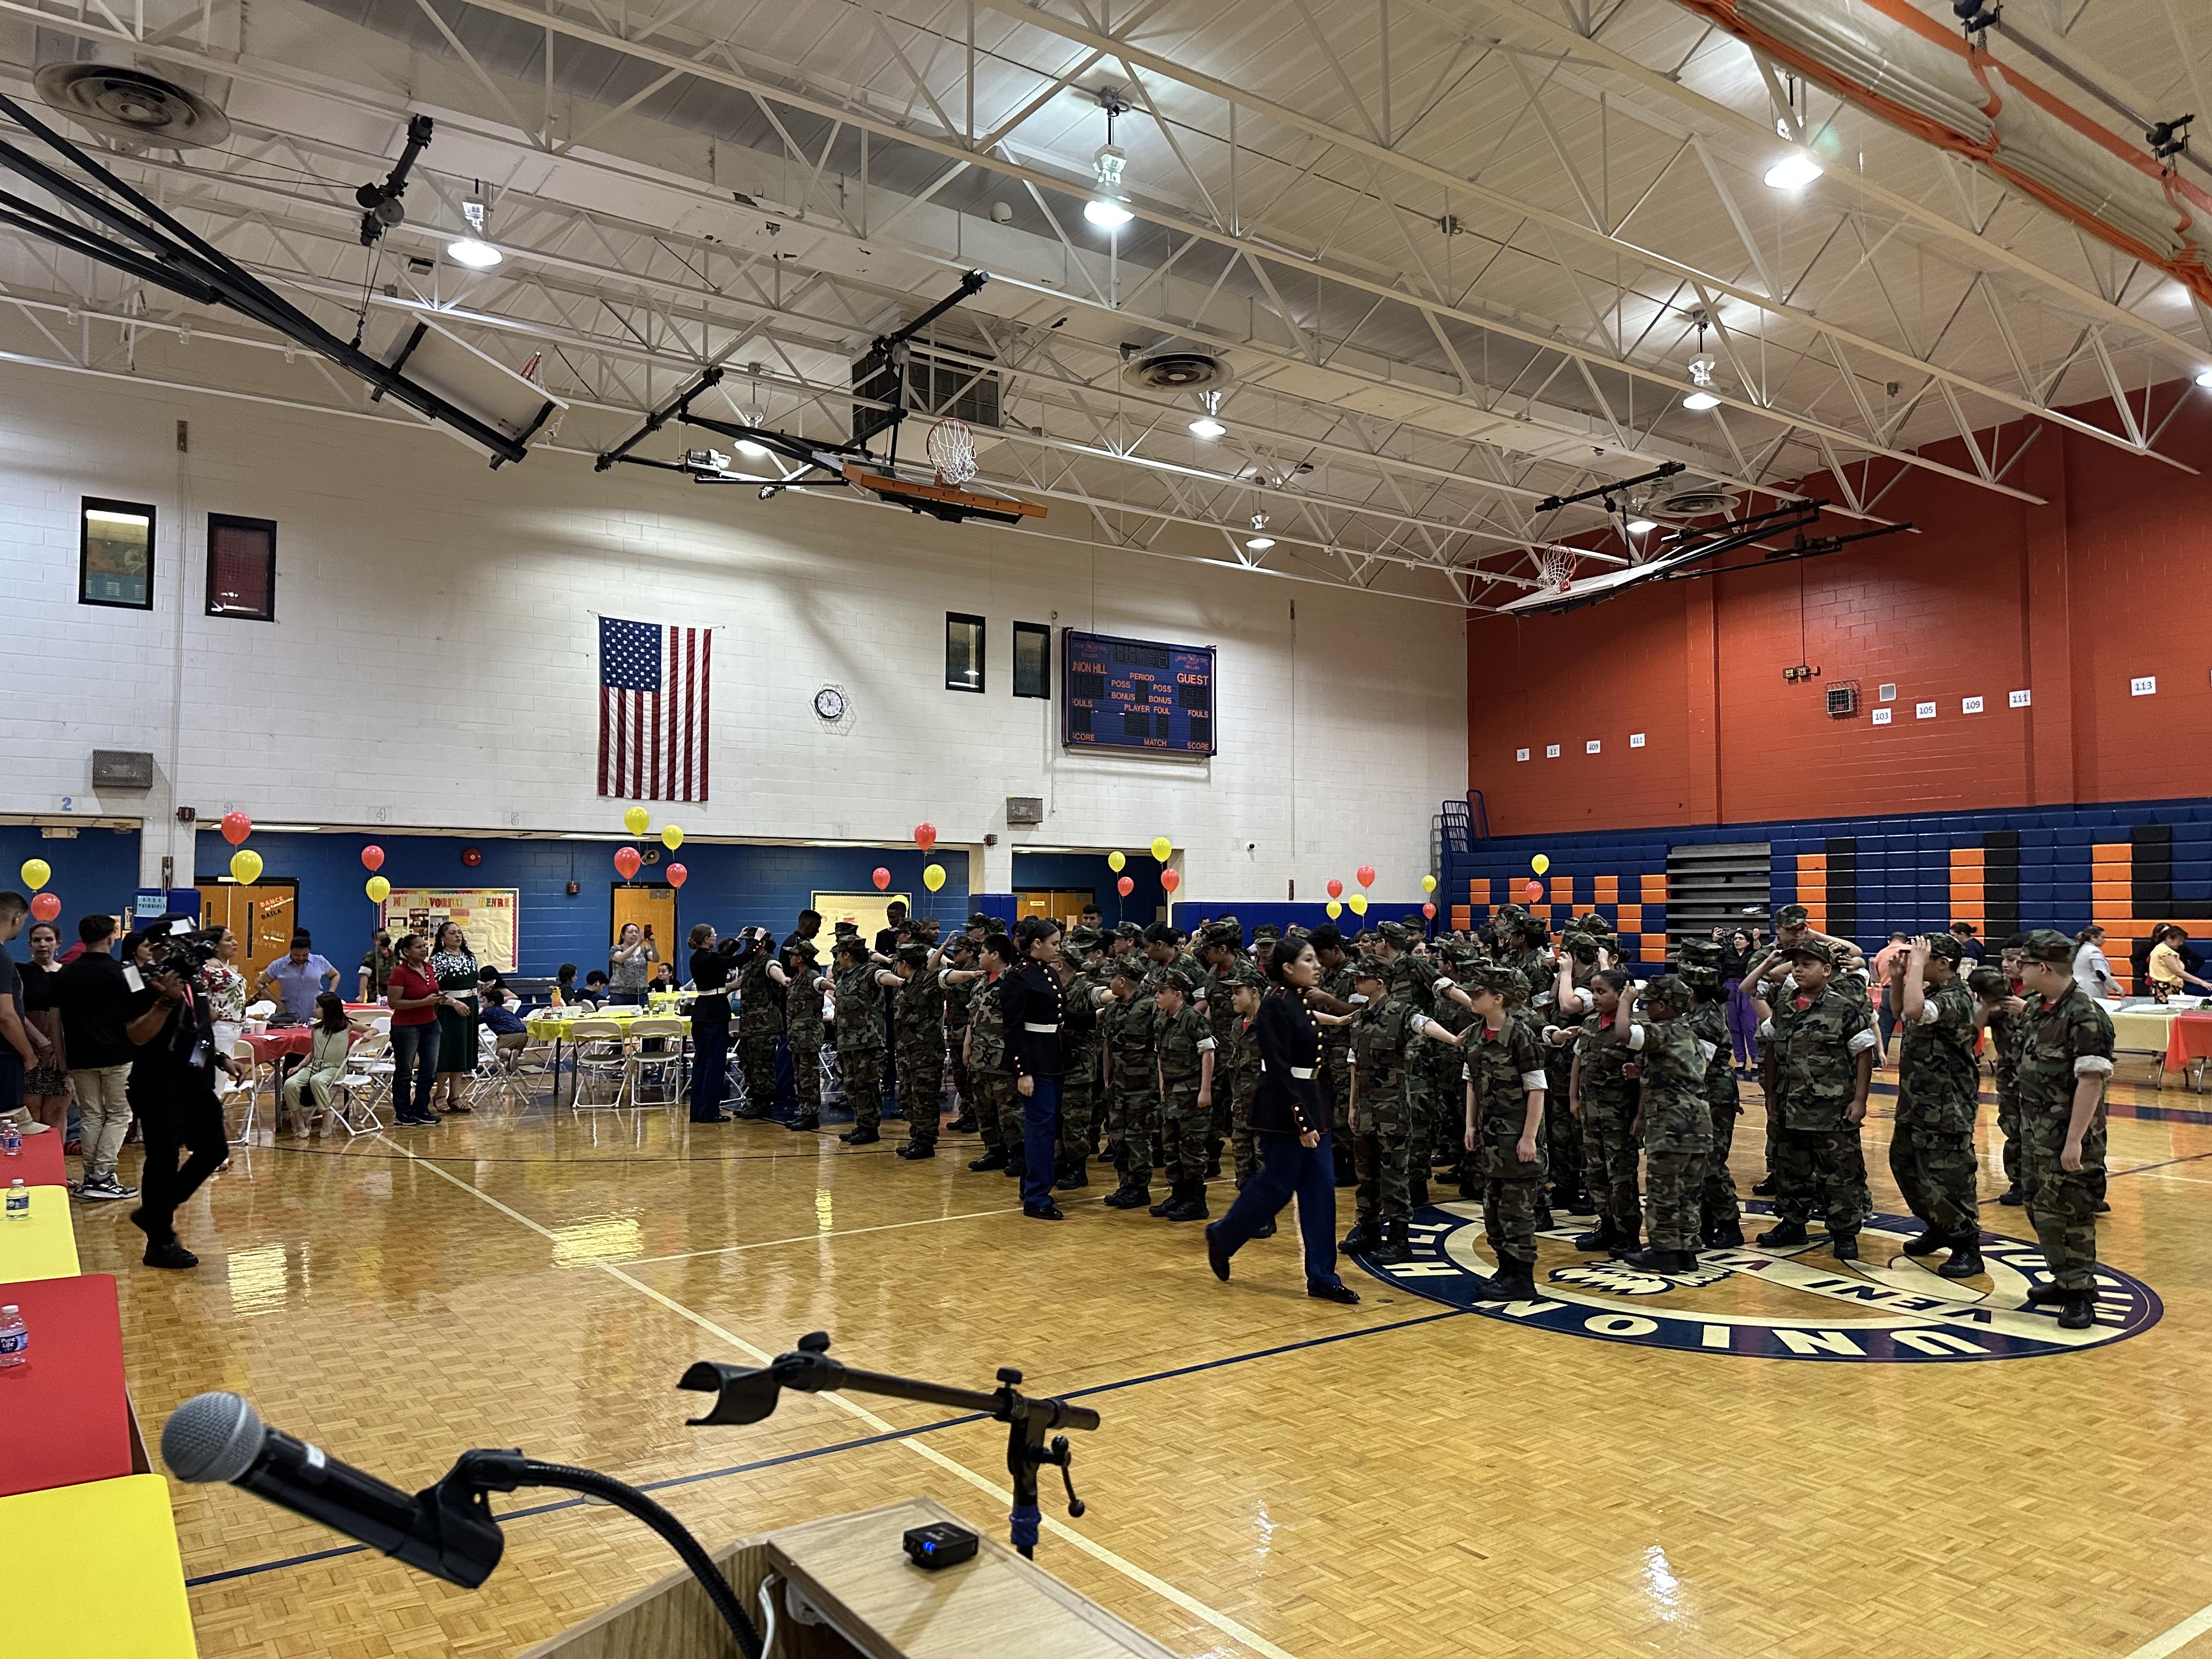 The Union Hill Middle School Young Marines Ceremony